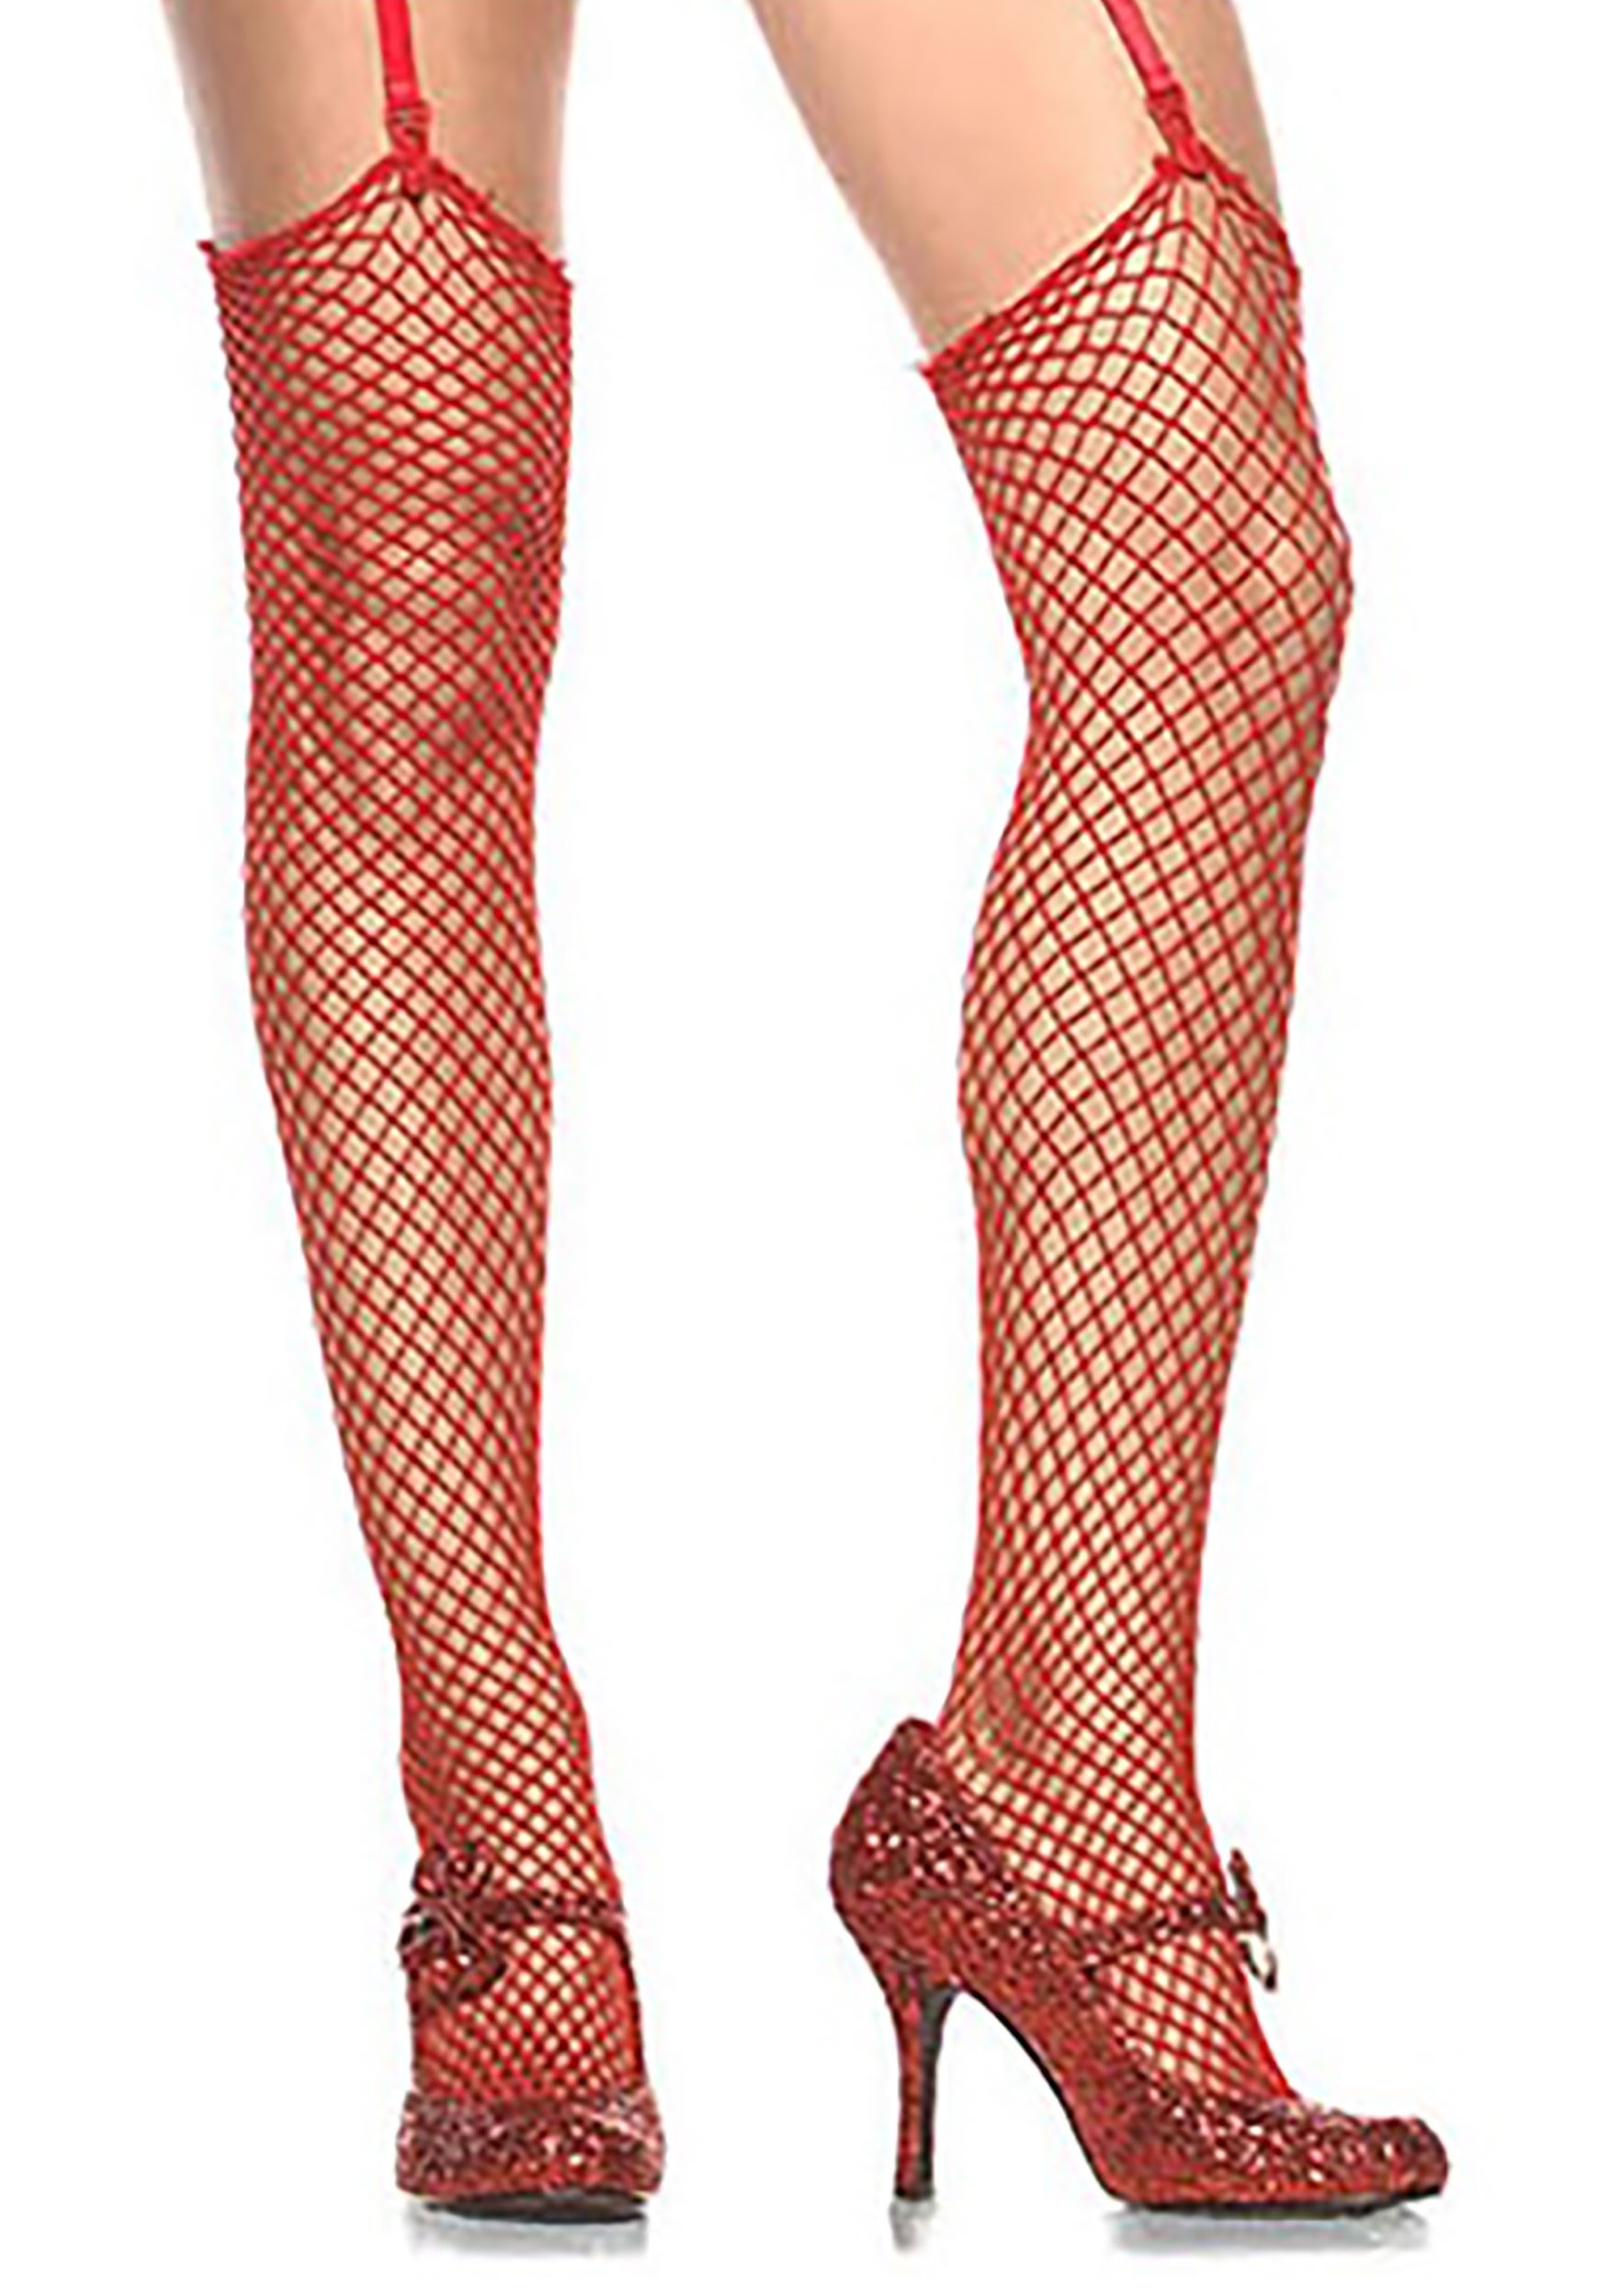 https://images.halloweencostumes.eu/products/6902/1-1/red-fishnet-stockings.jpg